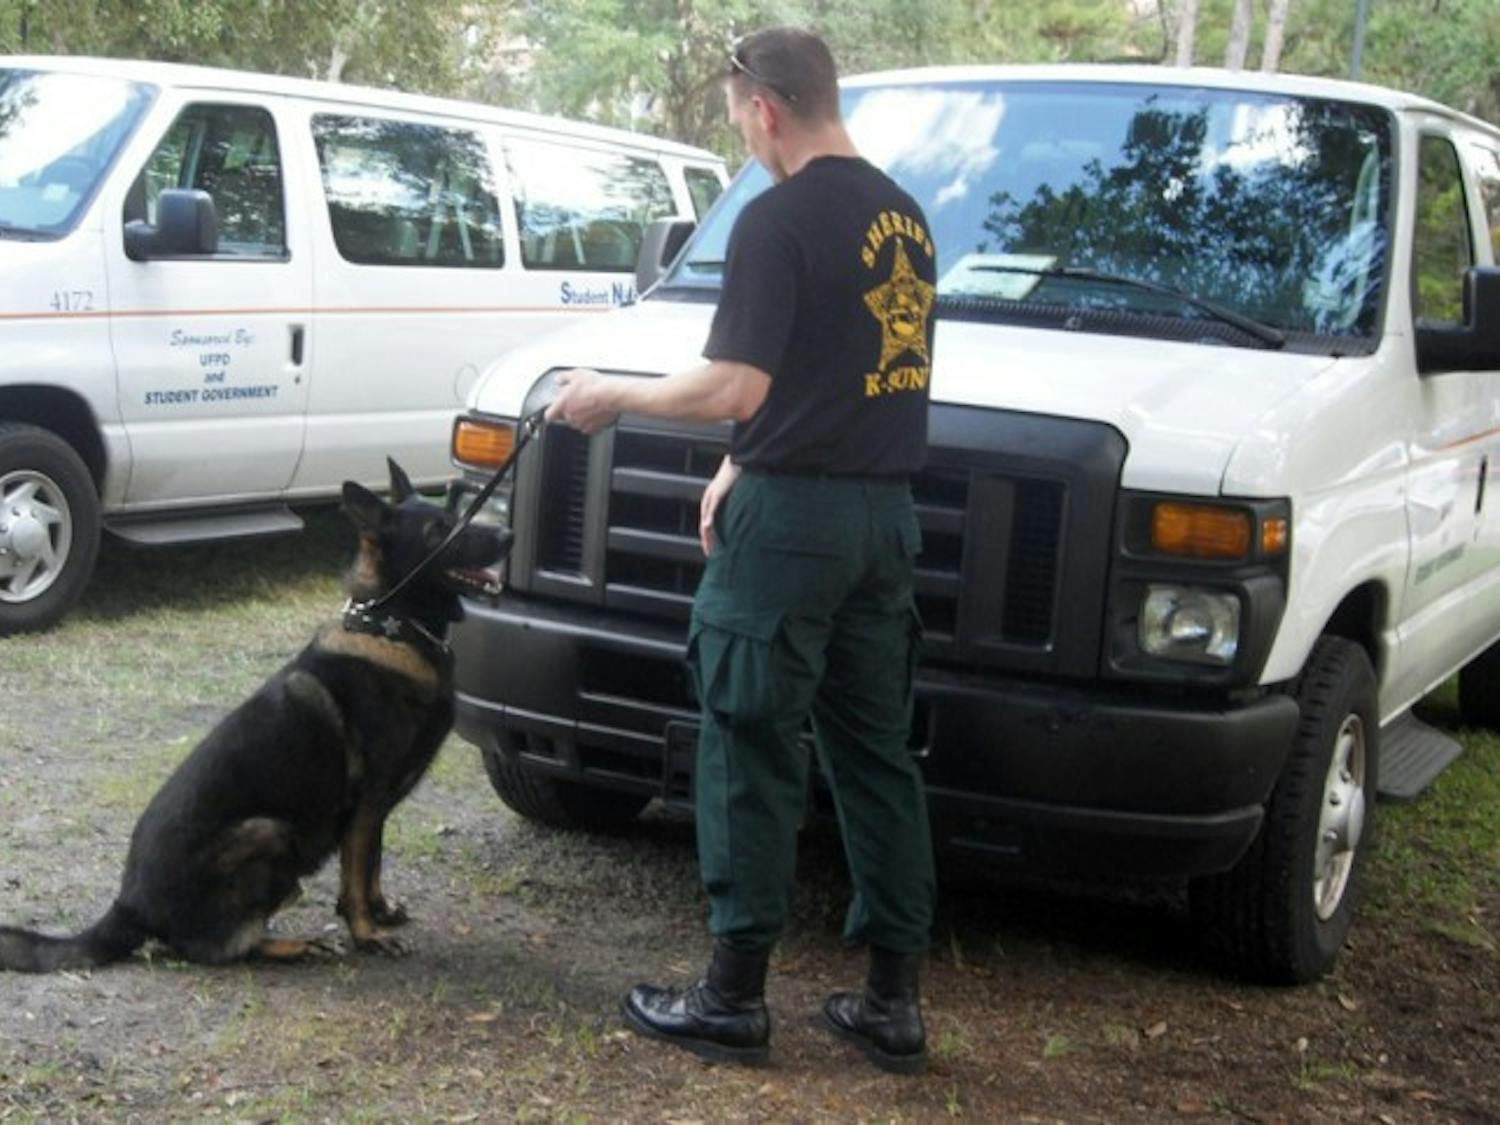 A German Shepherd police dog, Apollo, is led by Marion County Sheriff's Office Deputy Greg Combs. Apollo sniffs out narcotics for his yearly certification requirements.